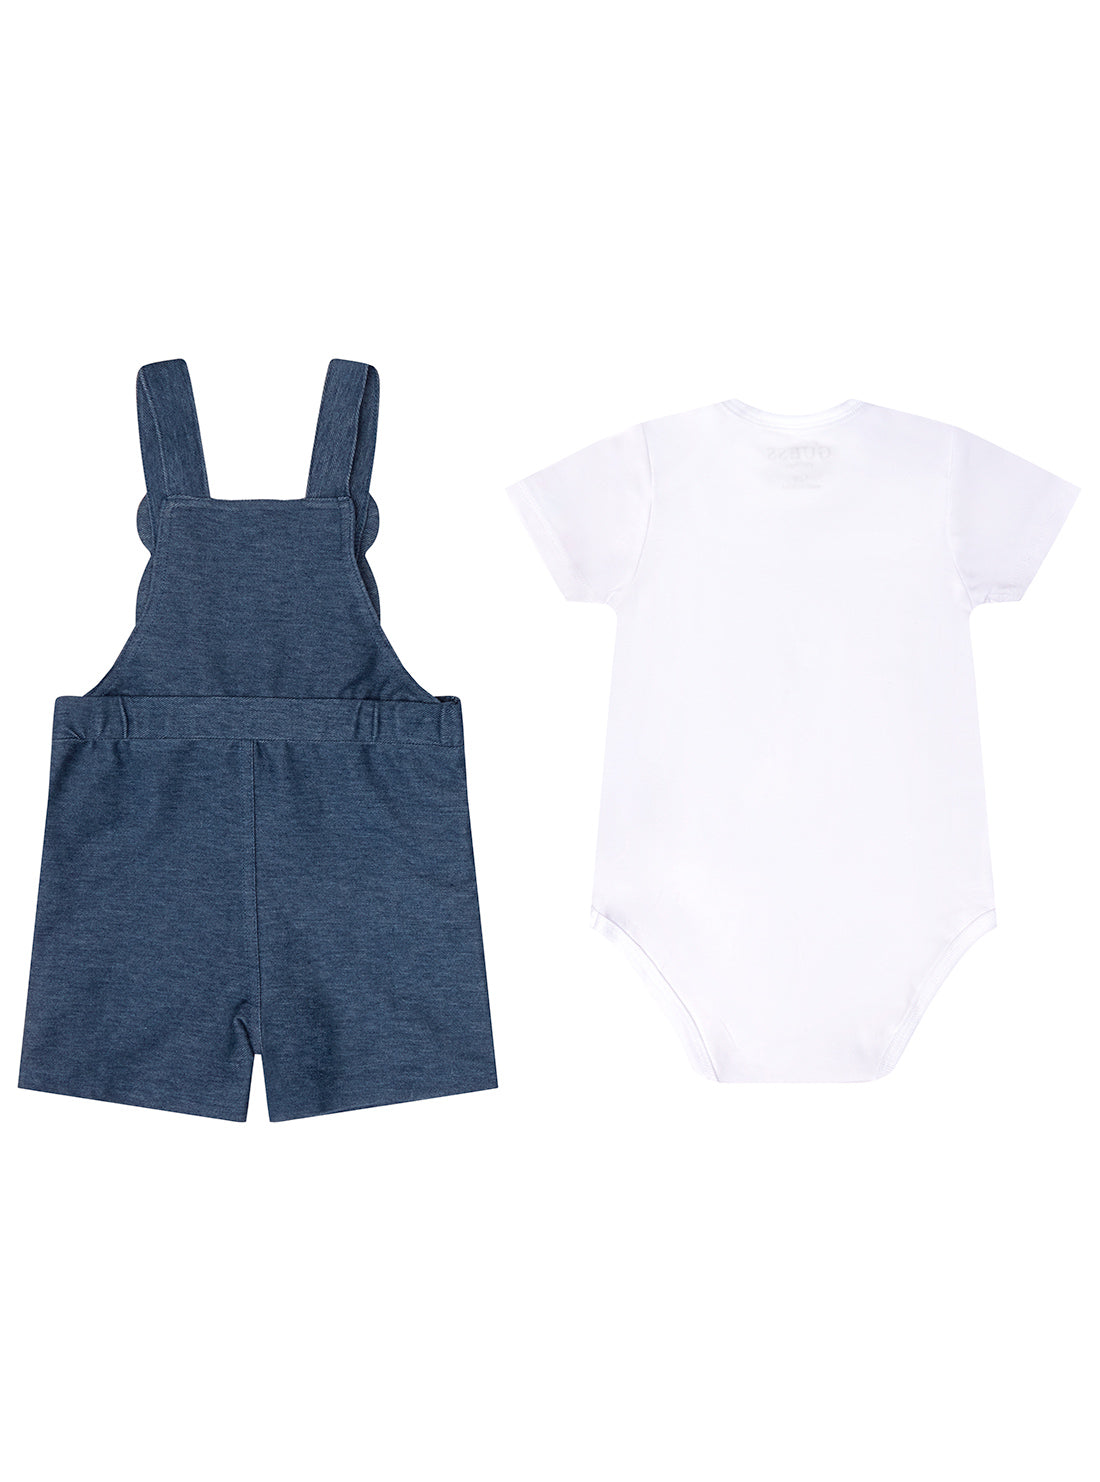 Baby's Blue Denim Teddy Bear Overalls and White Onesie back view